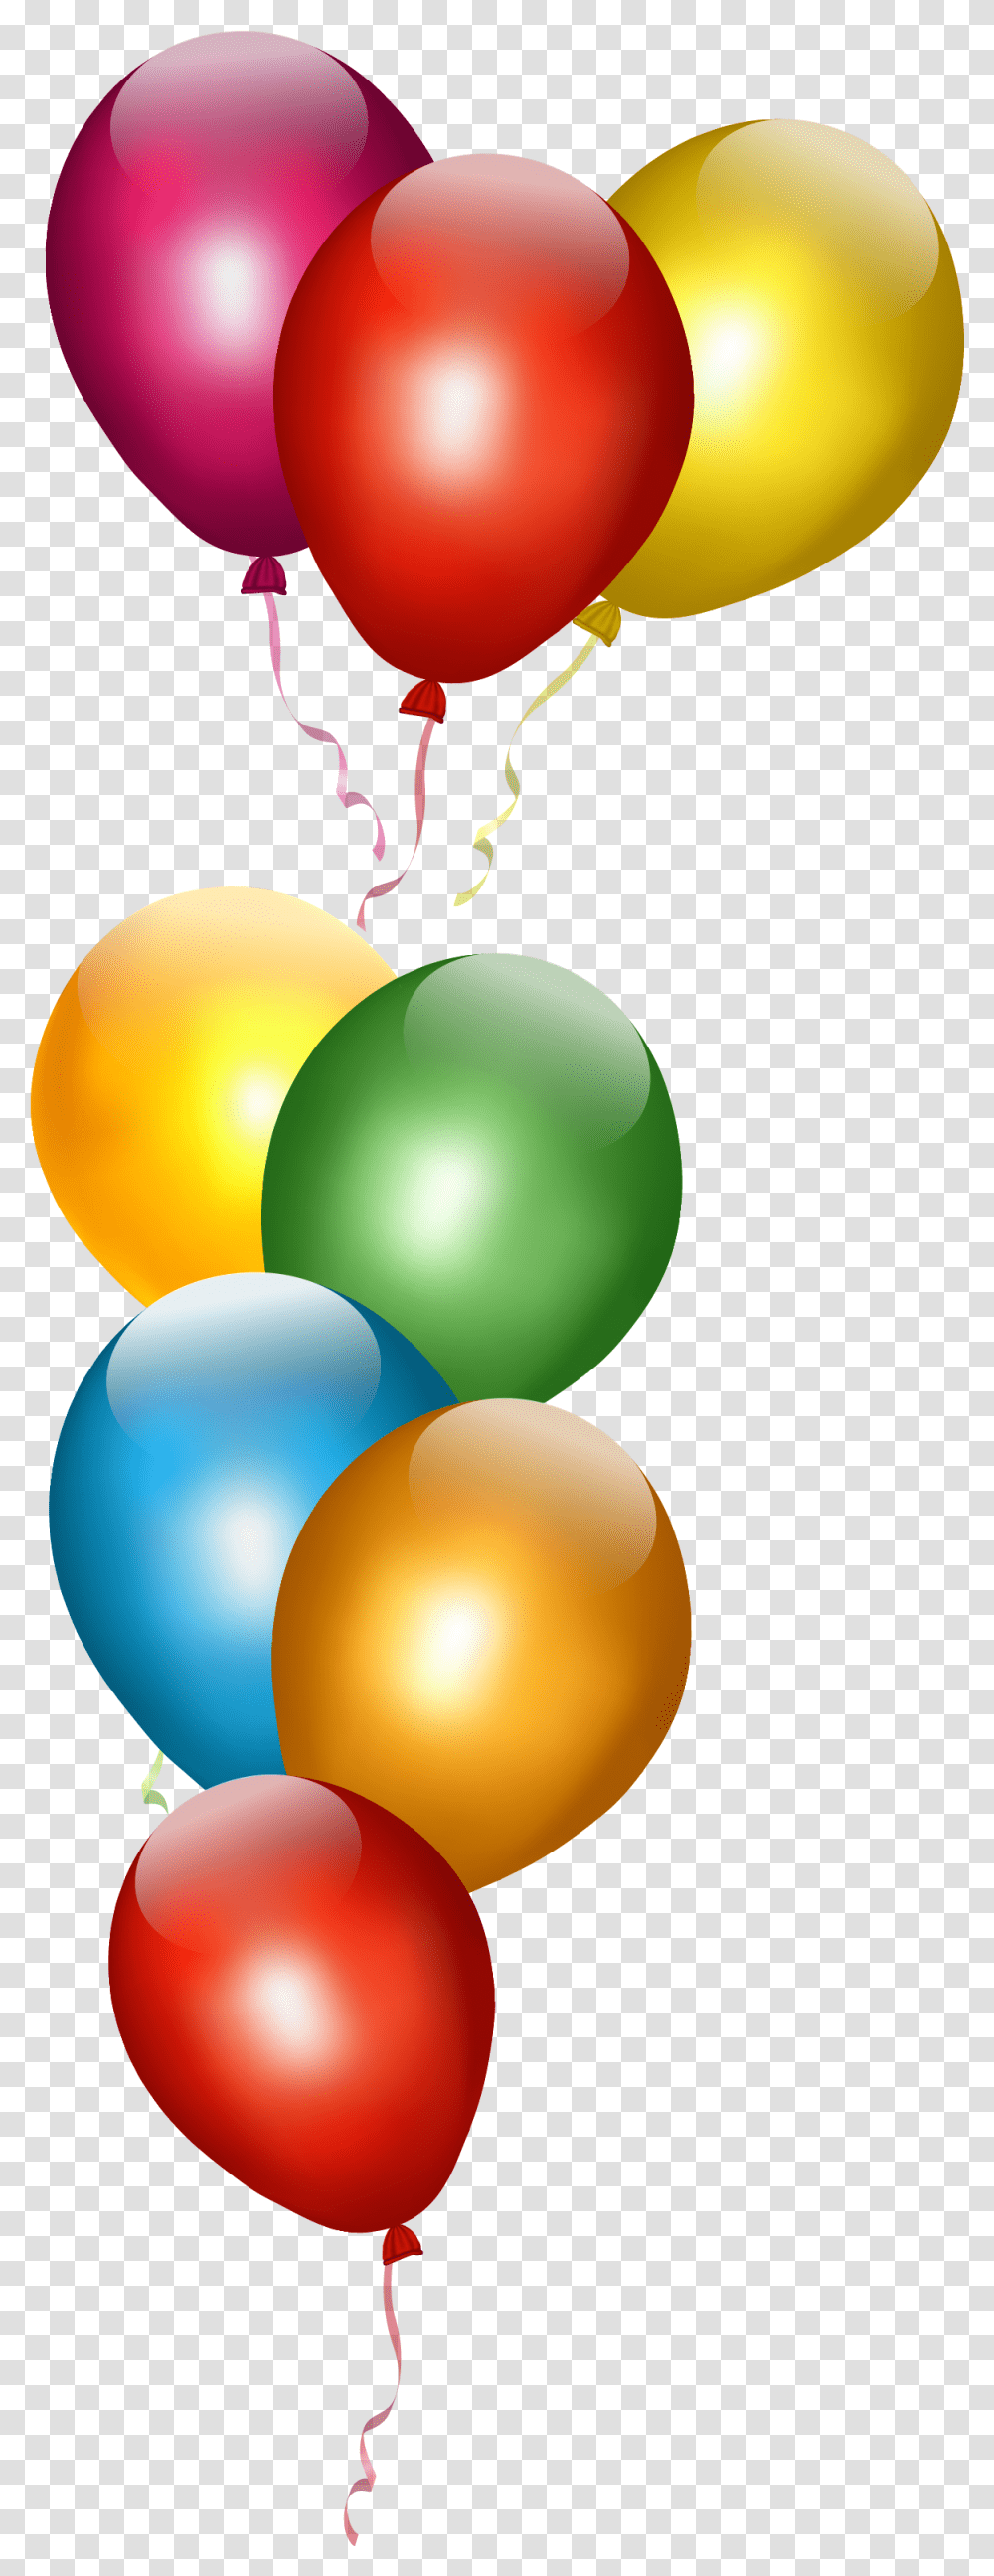 Party Toy Balloon Birthday Gift Birthday Balloons, Sphere Transparent Png